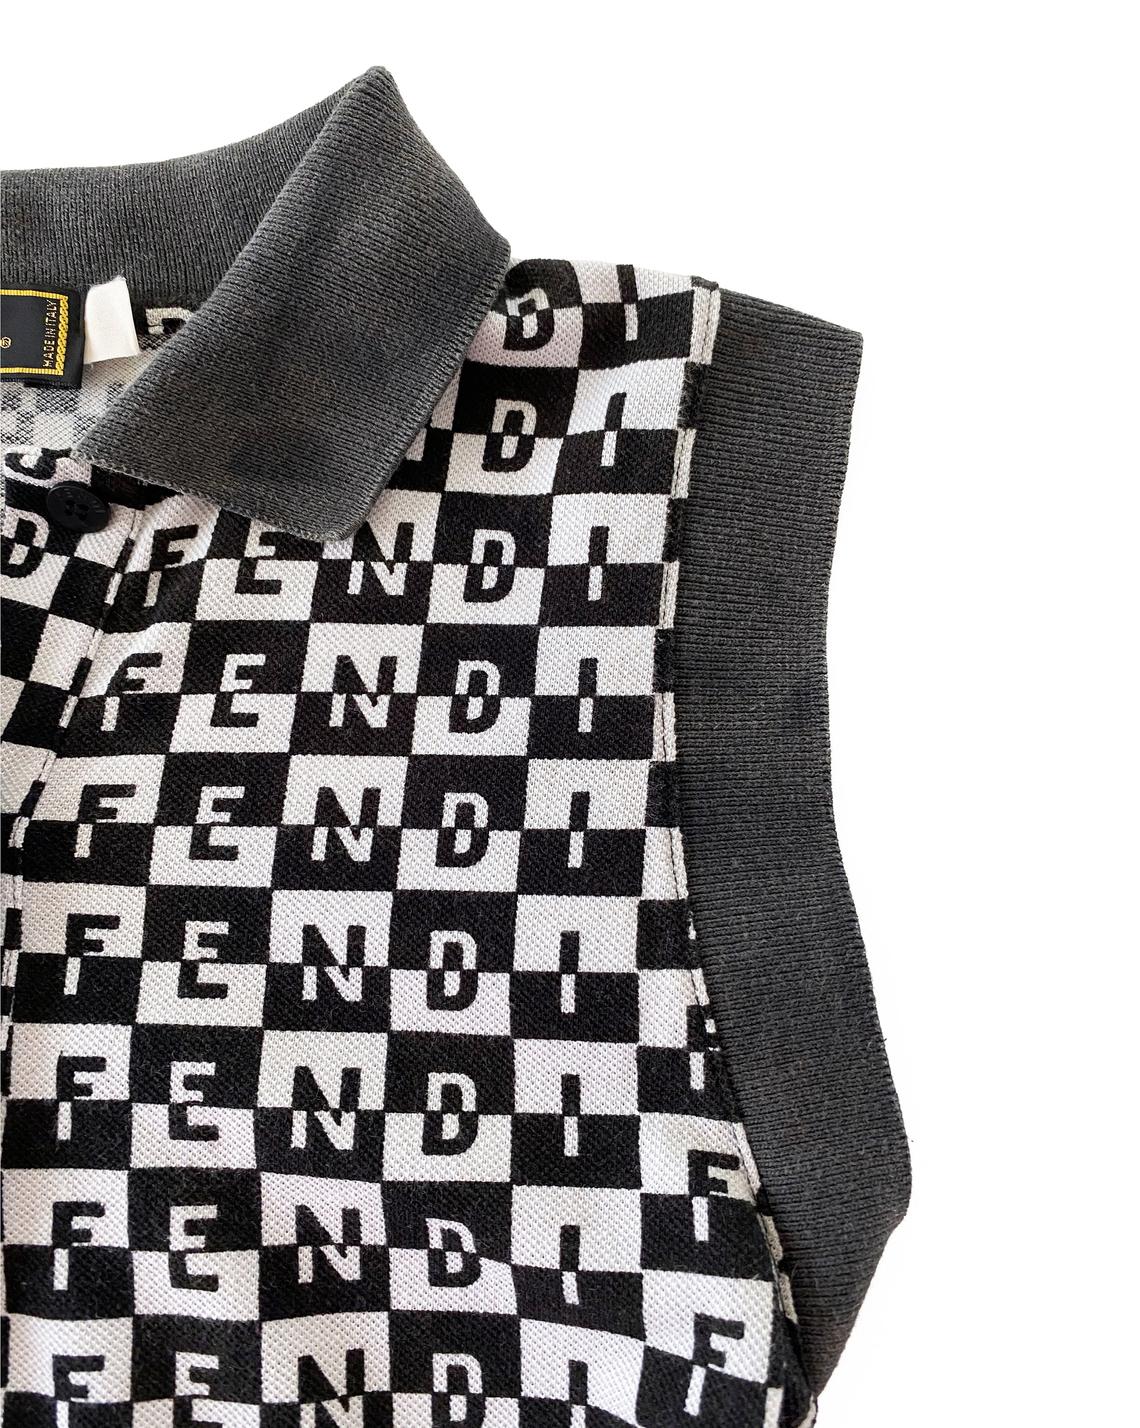 Fruit Vintage Fendi logo dress dating to the 90s, it features a polo shirt dress cut and a bold Fendi Logo print in black and white.